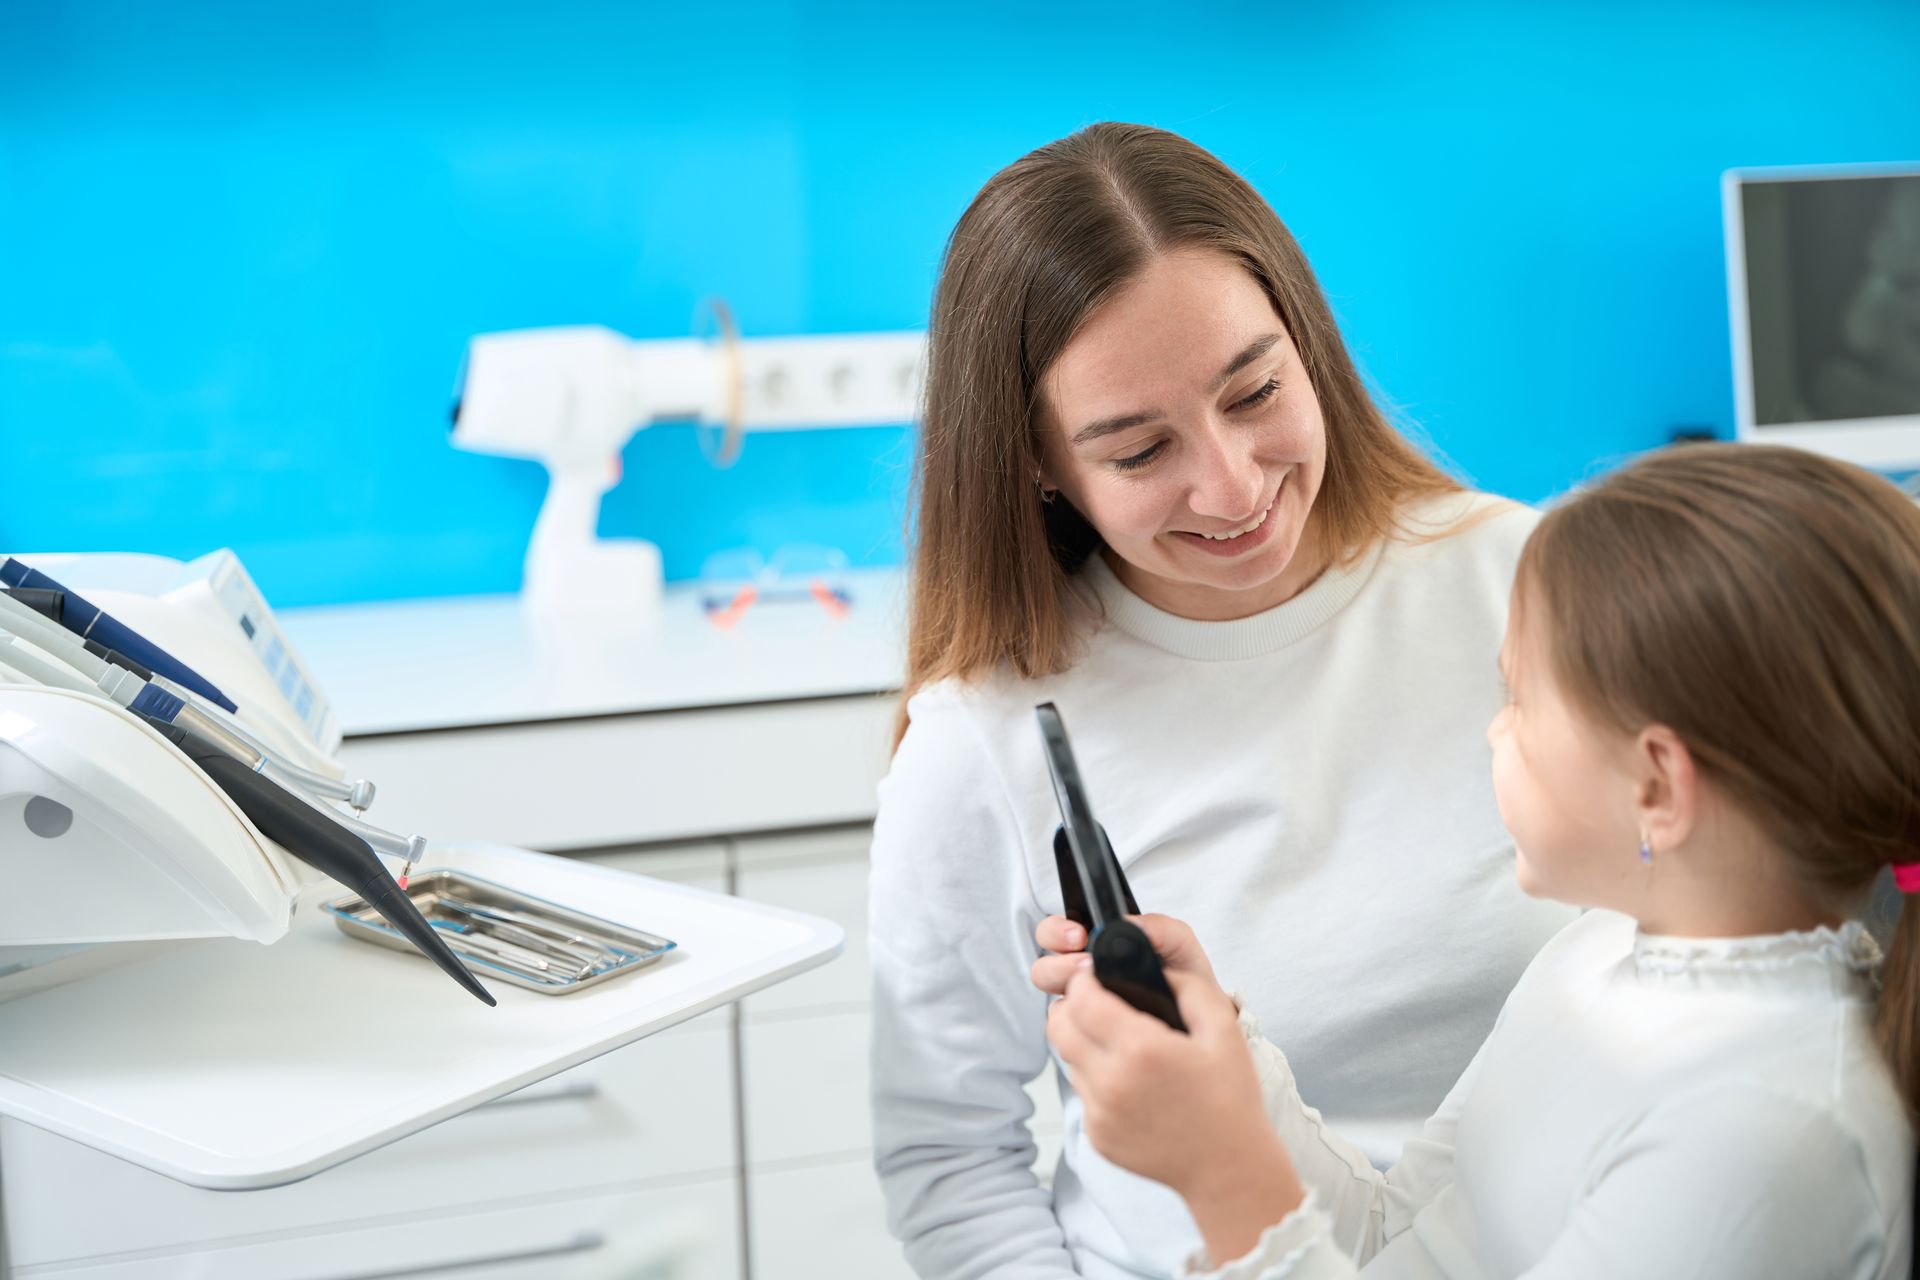 the dentist hands the child a mirror so she can admire her fresh, clean smile